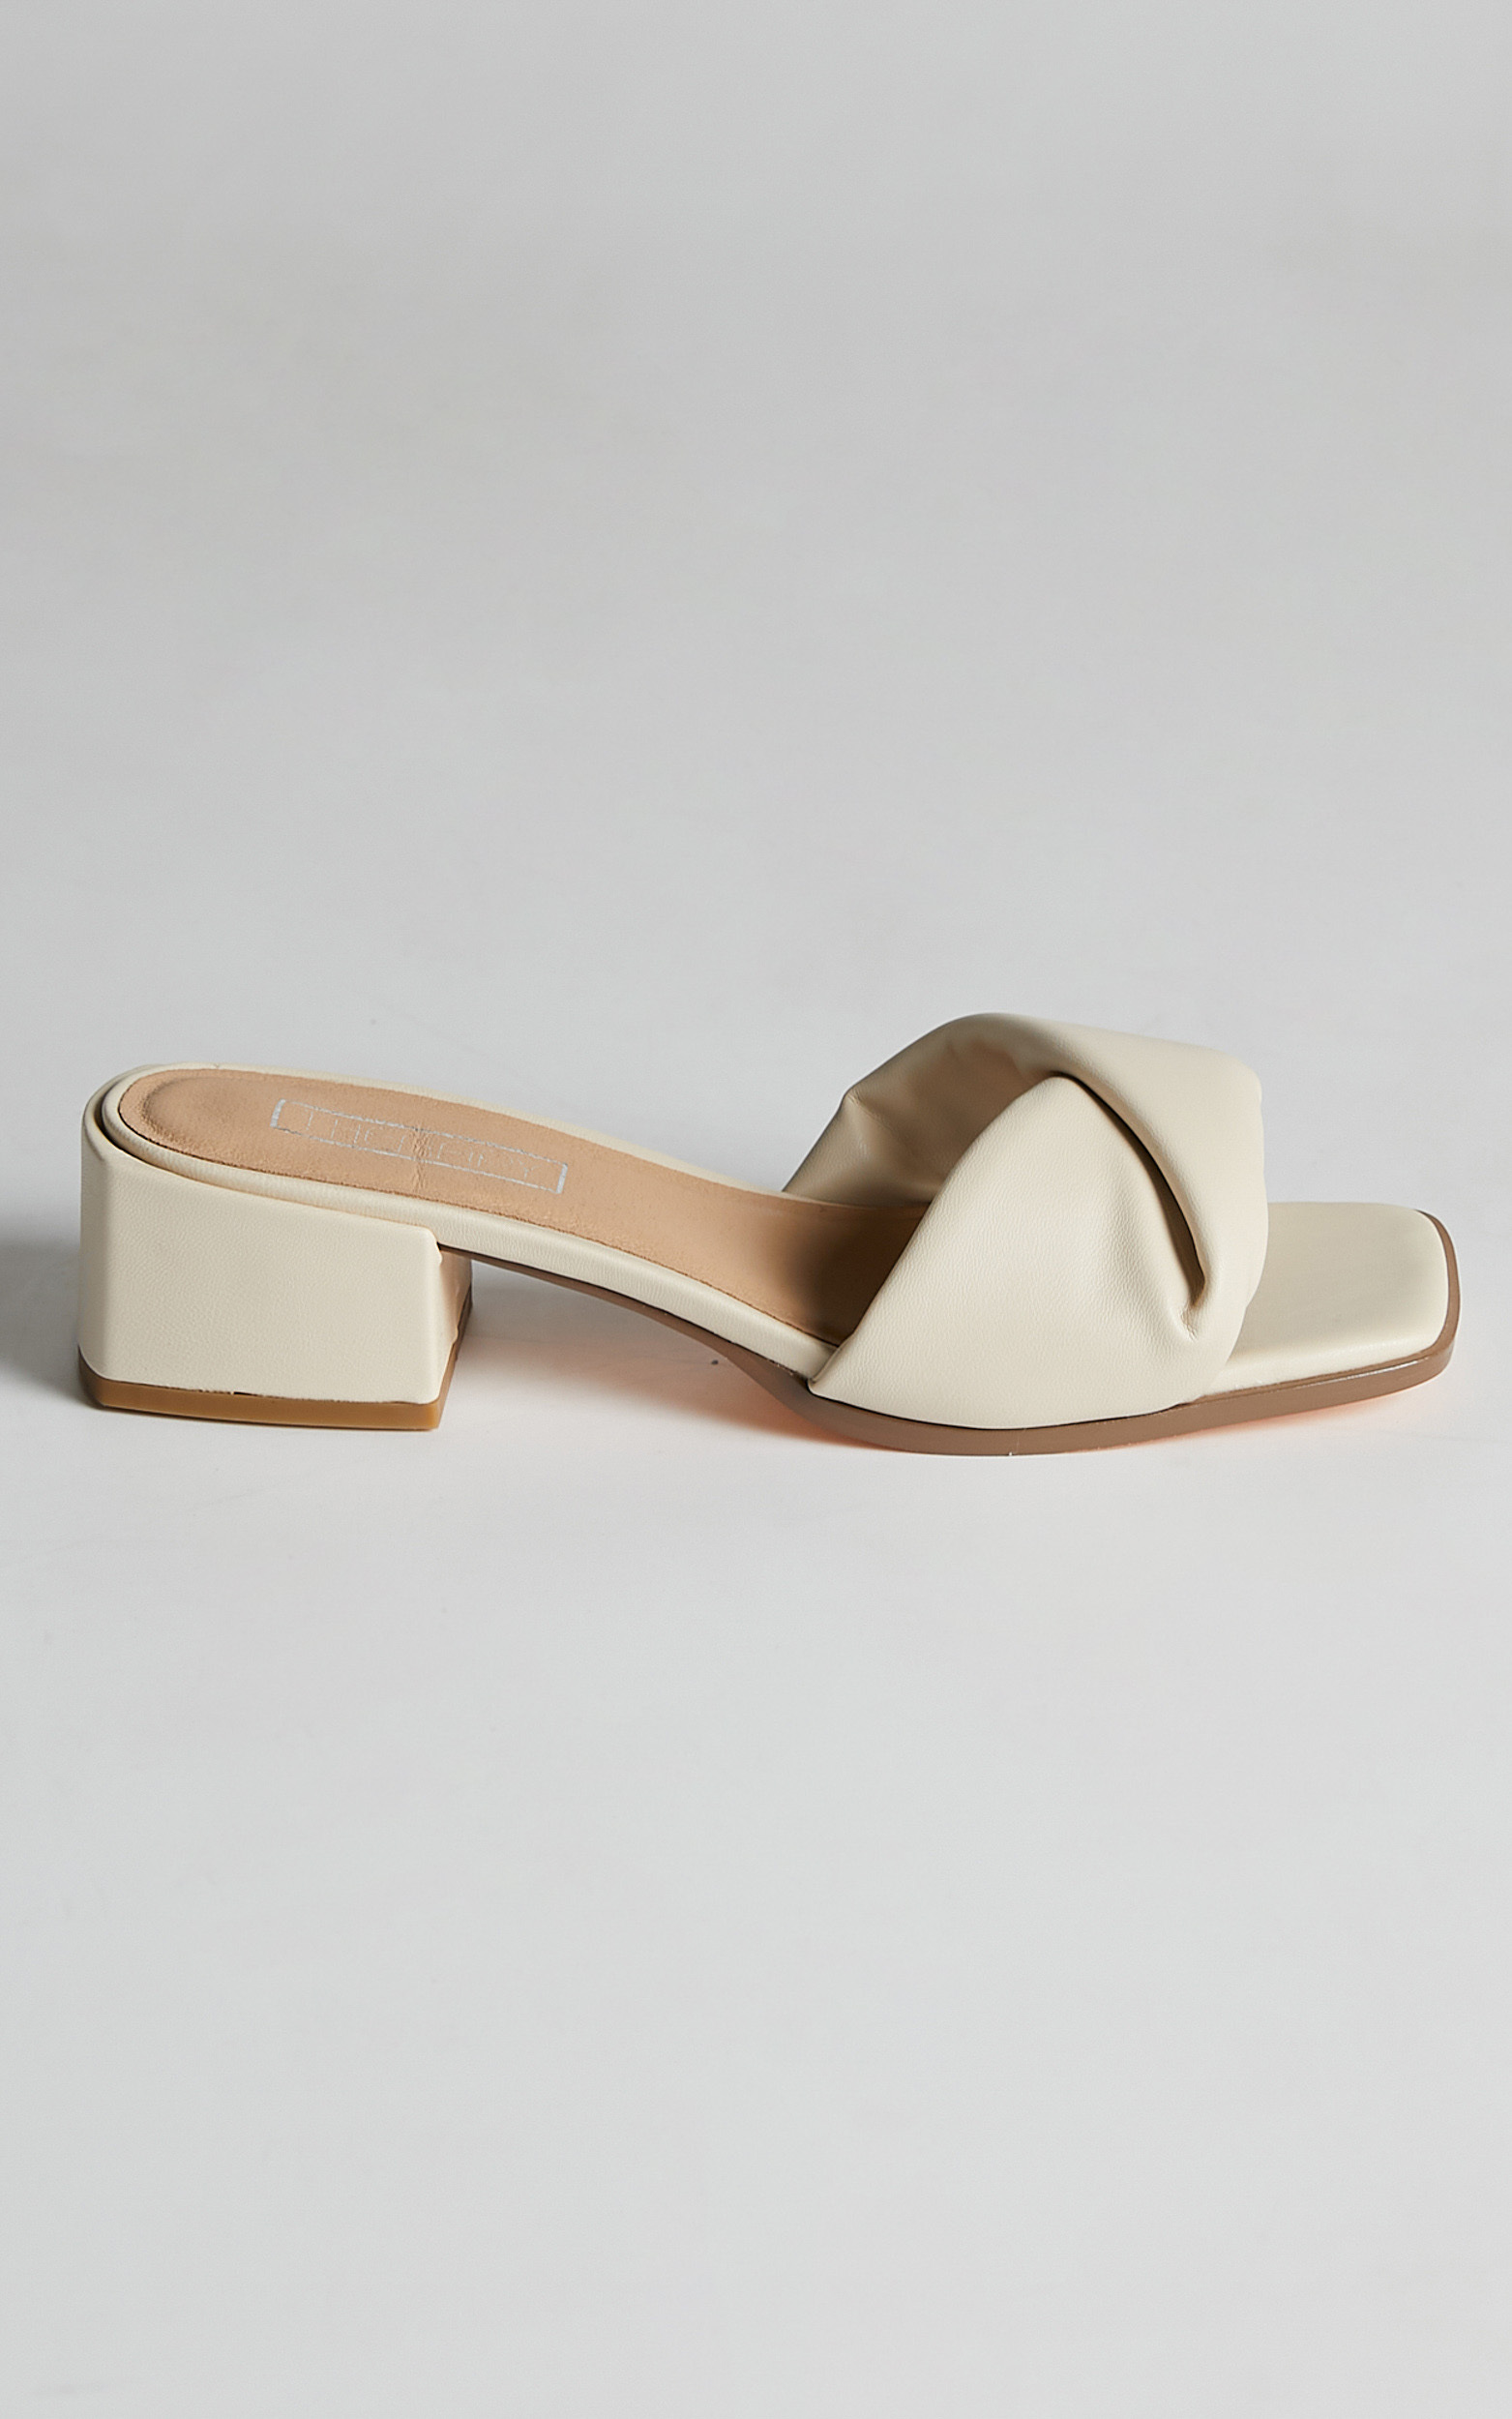 THERAPY - SKYE MULES in bone - 05, BRN2, hi-res image number null